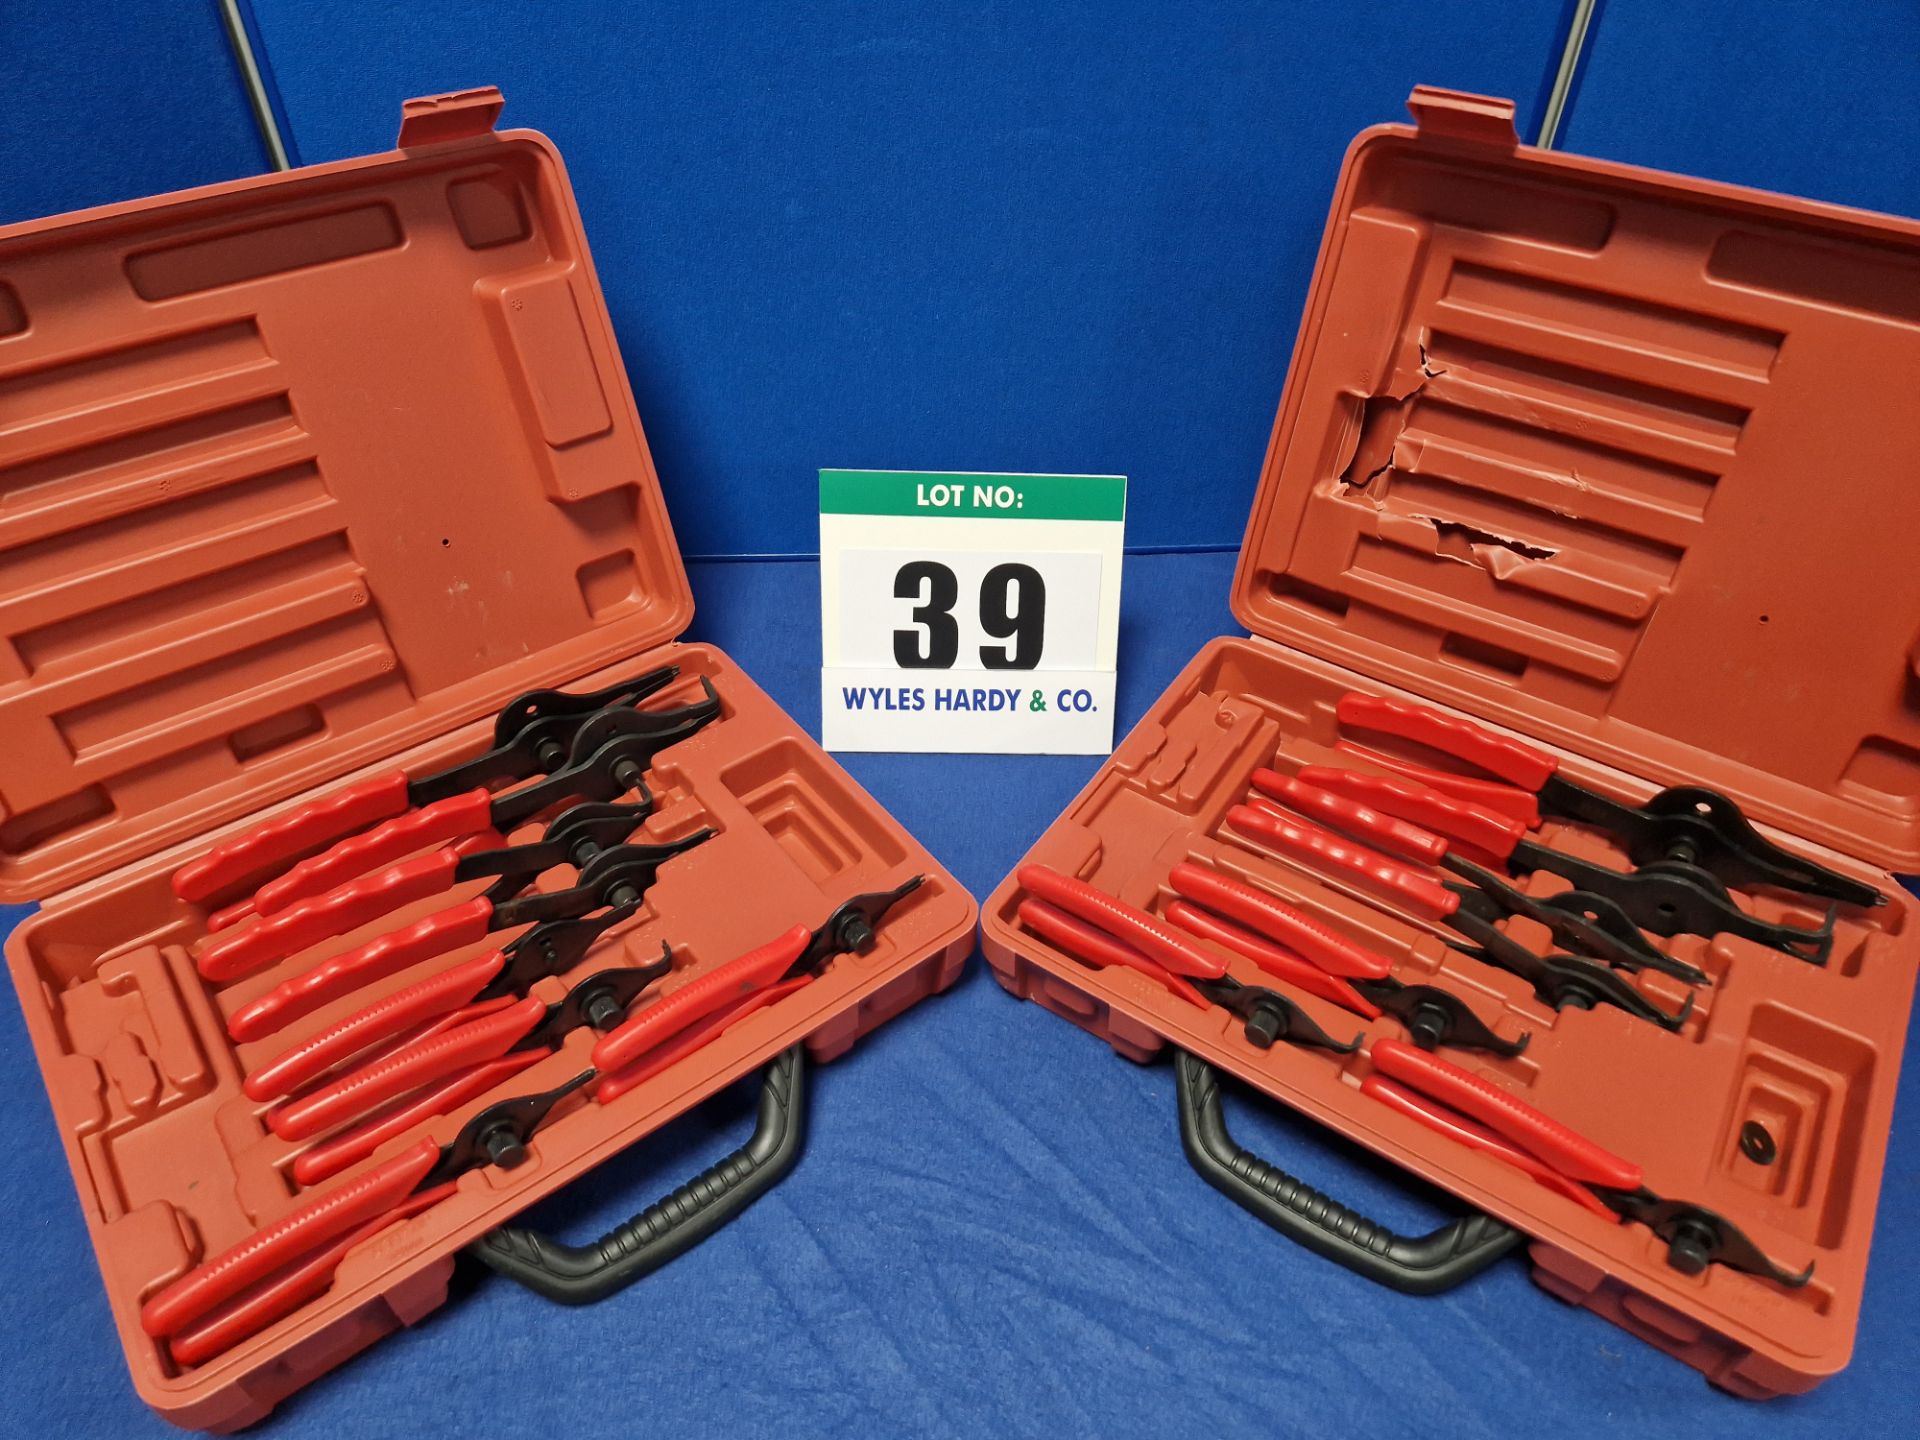 Two Incomplete Circlip Plier Sets in Rigid Carry Cases (As Photographed)